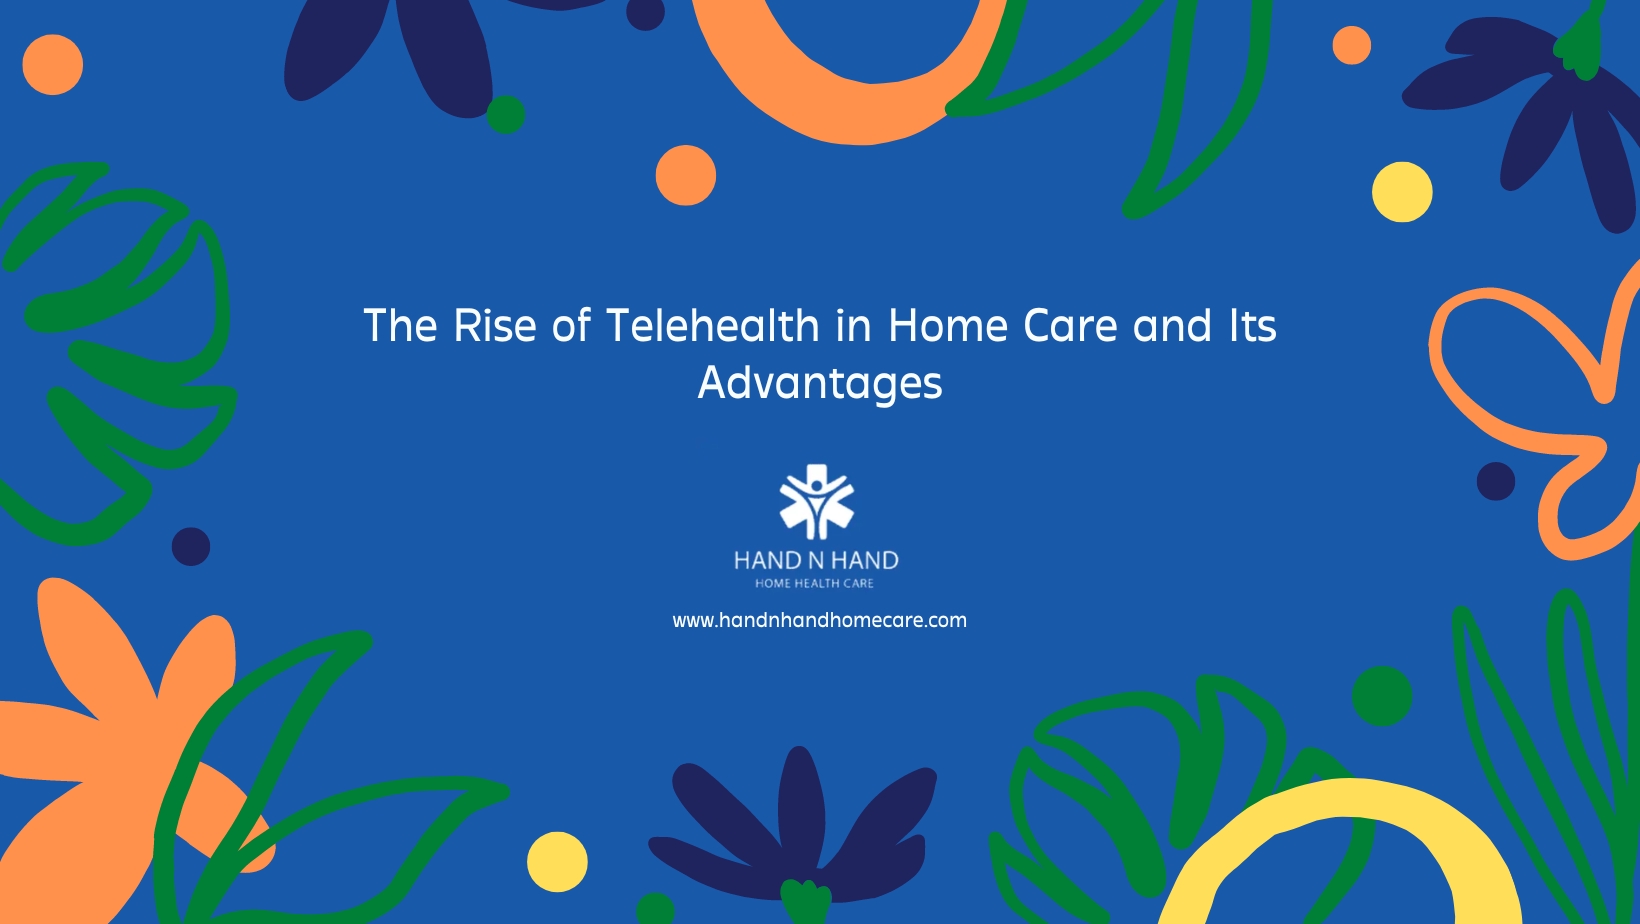 The Rise of Telehealth in Home Care and Its Advantages